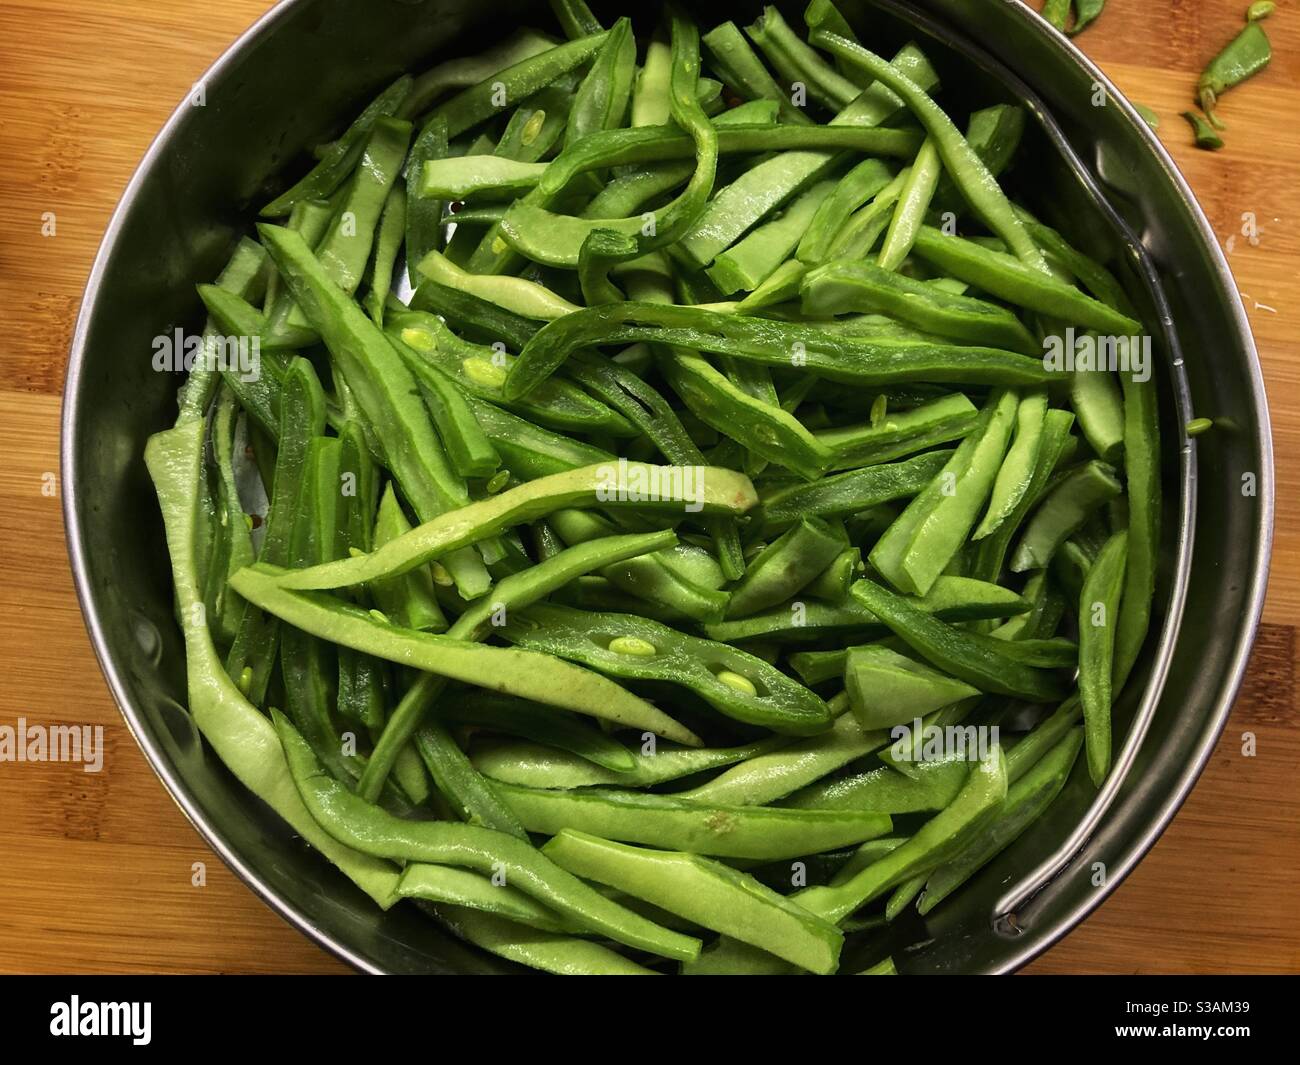 Green beans ready to cook Stock Photo